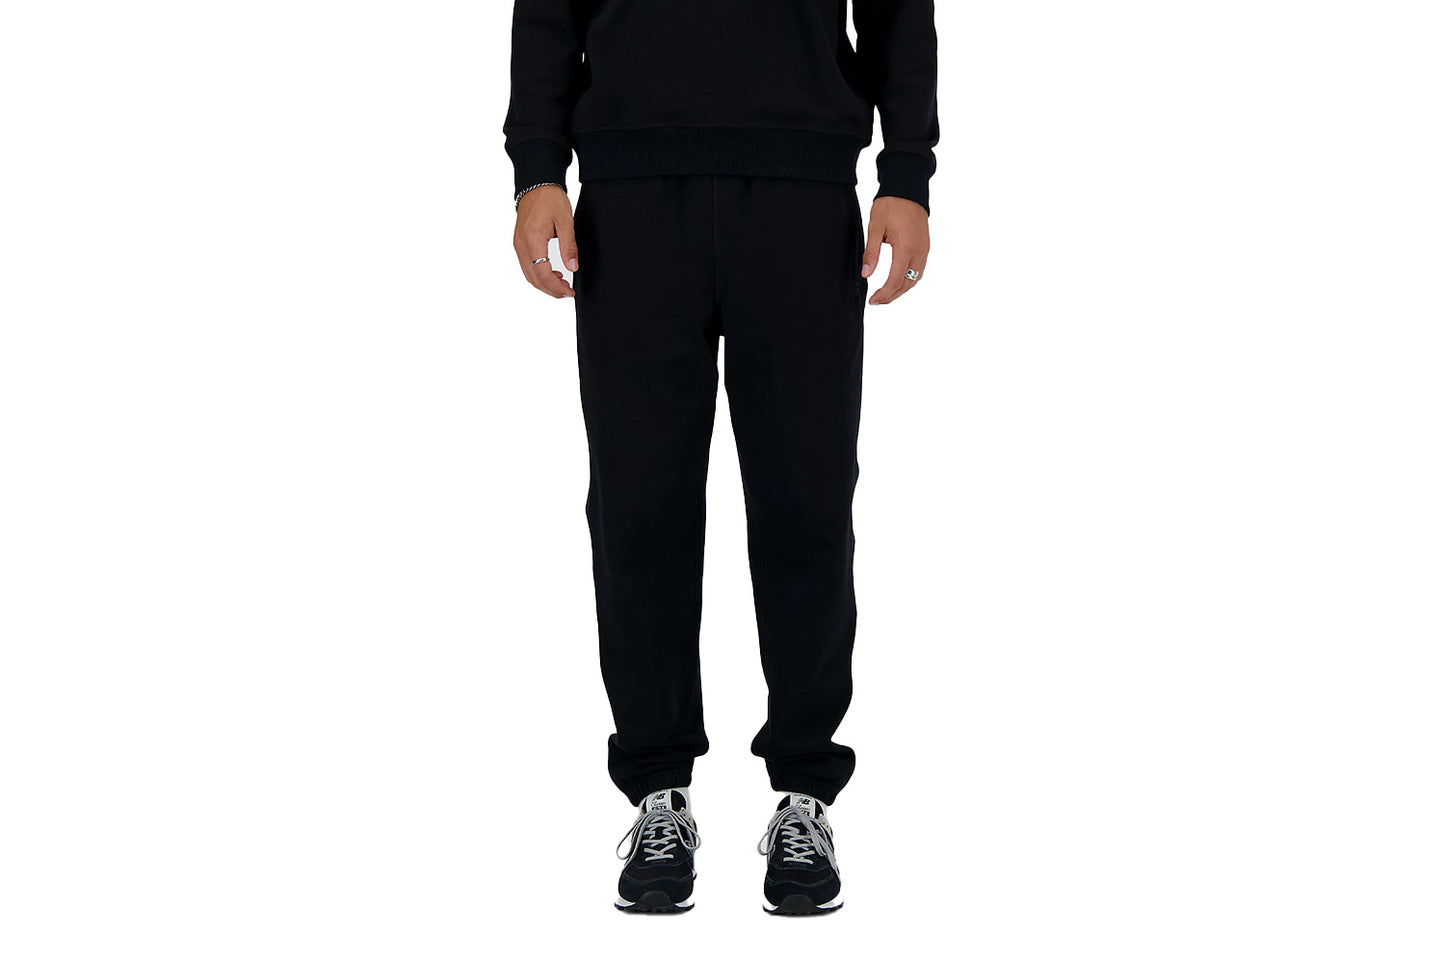 Athletics French Terry Jogger